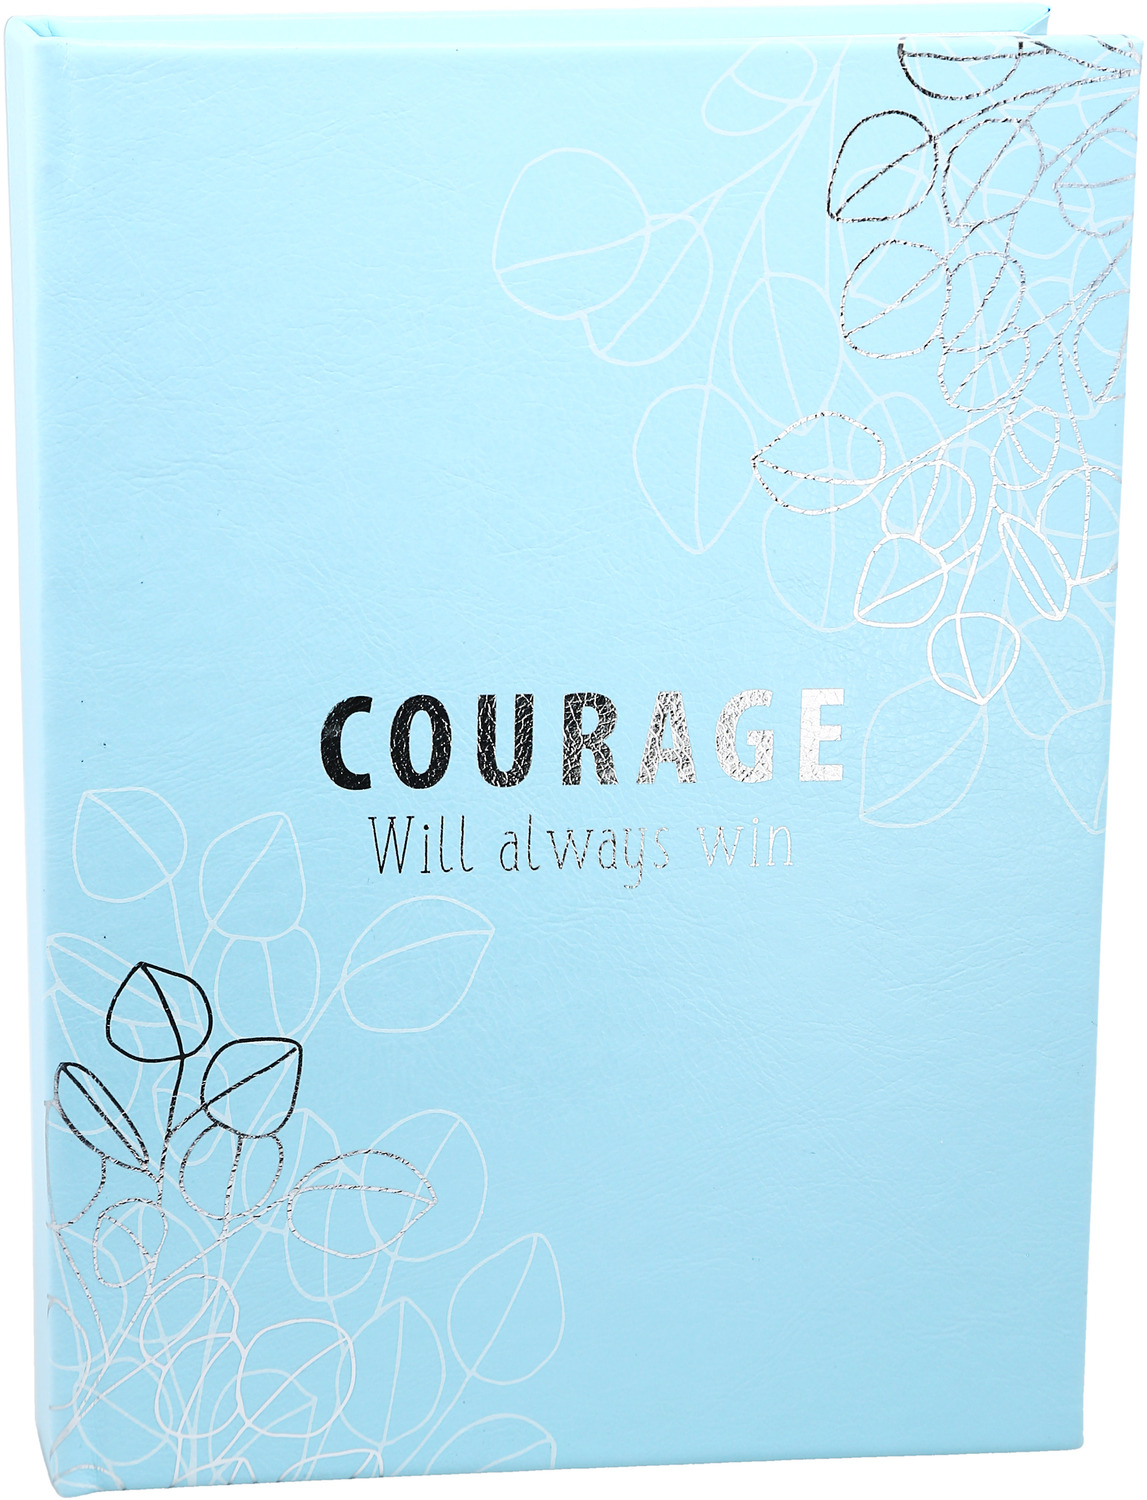 Courage by Faith Hope and Healing - Courage - 6.25" x 8.75" Inspiration Journal